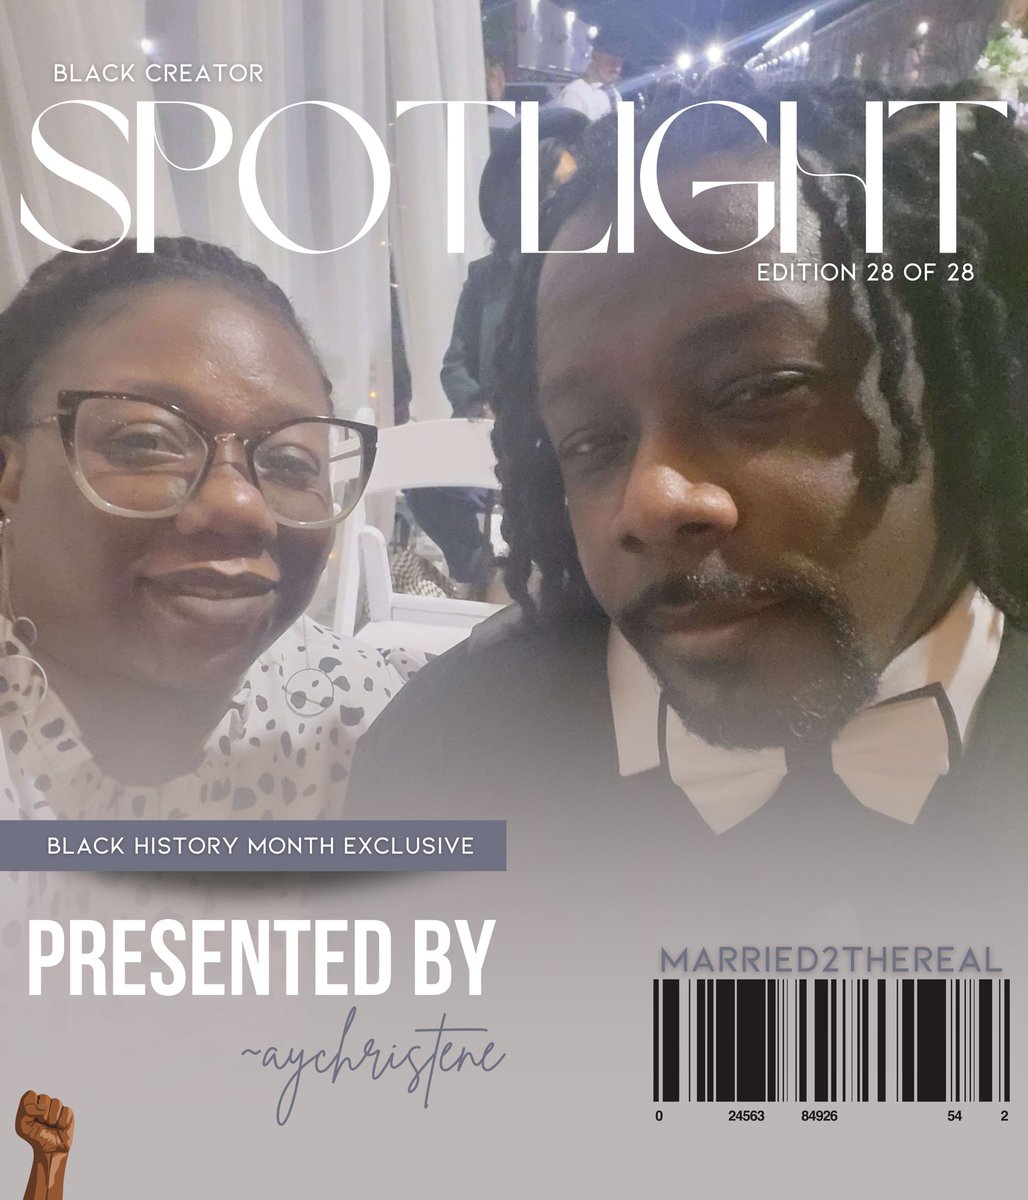 Black Creator Spotlight Issue: #28:  We celebrate the most hilarious couple @Married2TheReal Be sure to check them out for reactions, game streams and a lesson in self care and self love  

#blackcreatorspotlight #blackcreators